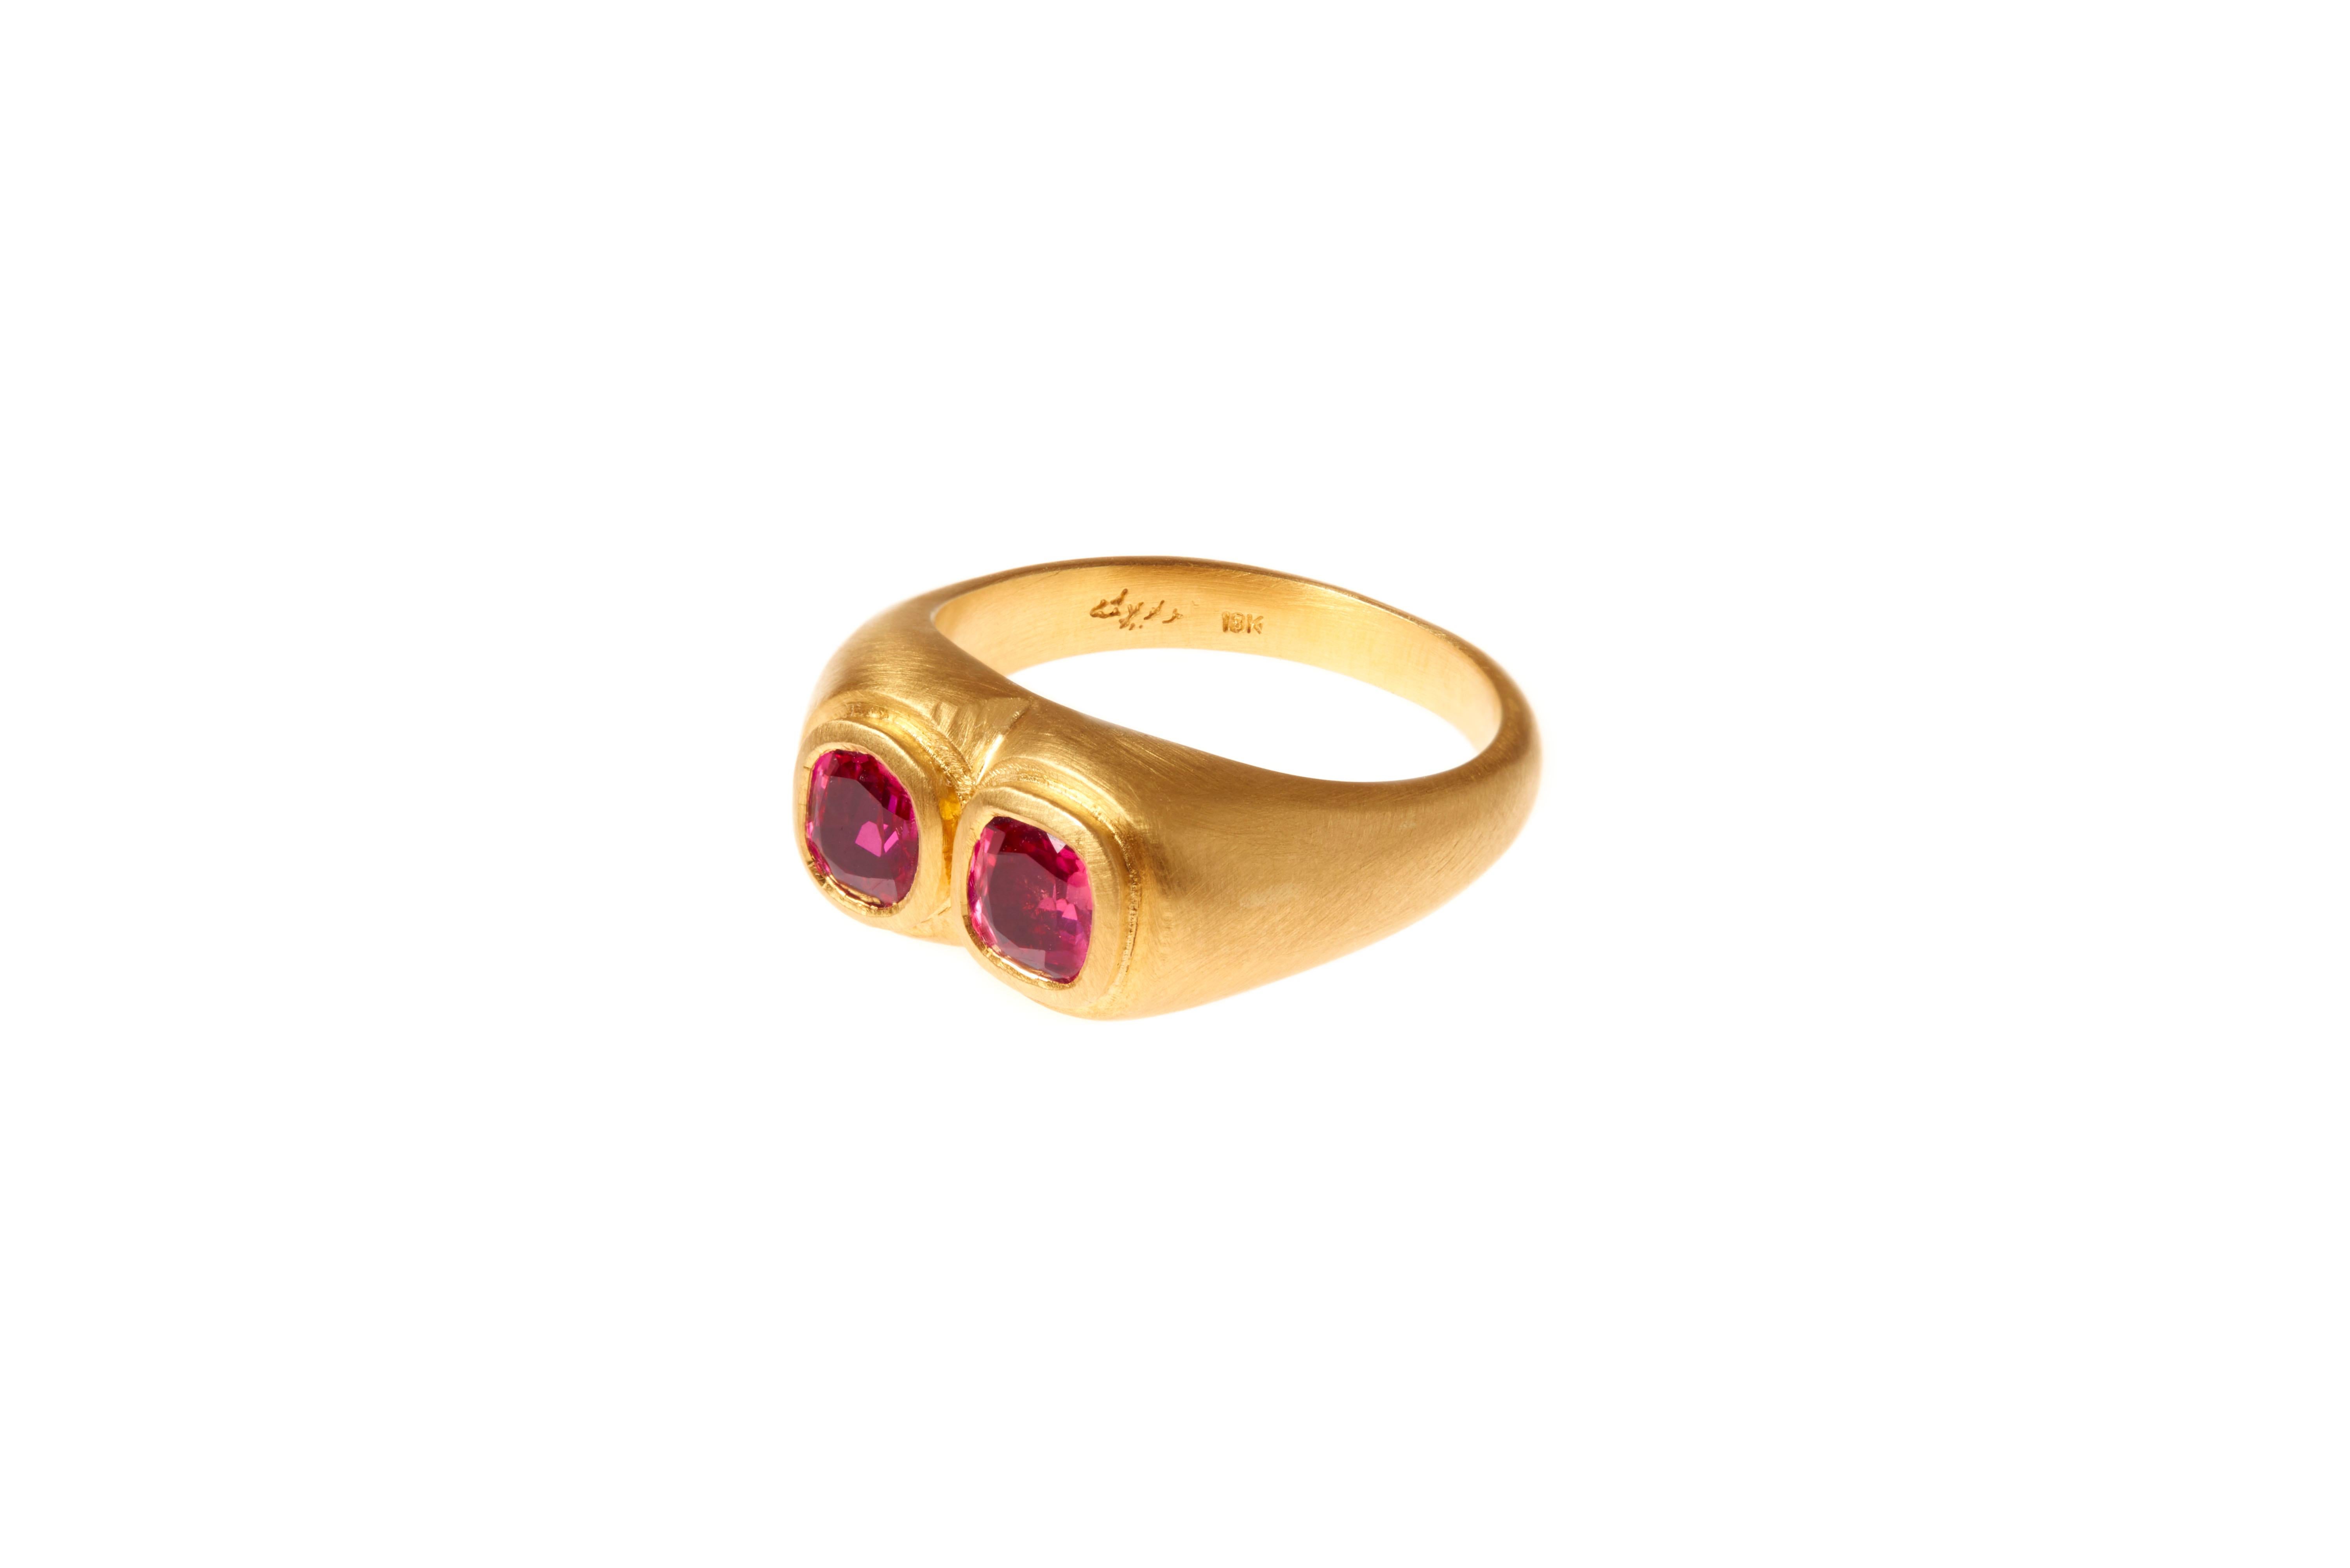 Darius Jewels One of a Kind Double Ruby Ring is crafted entirely by hand. This ring features bezel set Antique Burmese Rubies.

18K Yellow Gold
1.25cts Unheated Antique Burmese Rubies